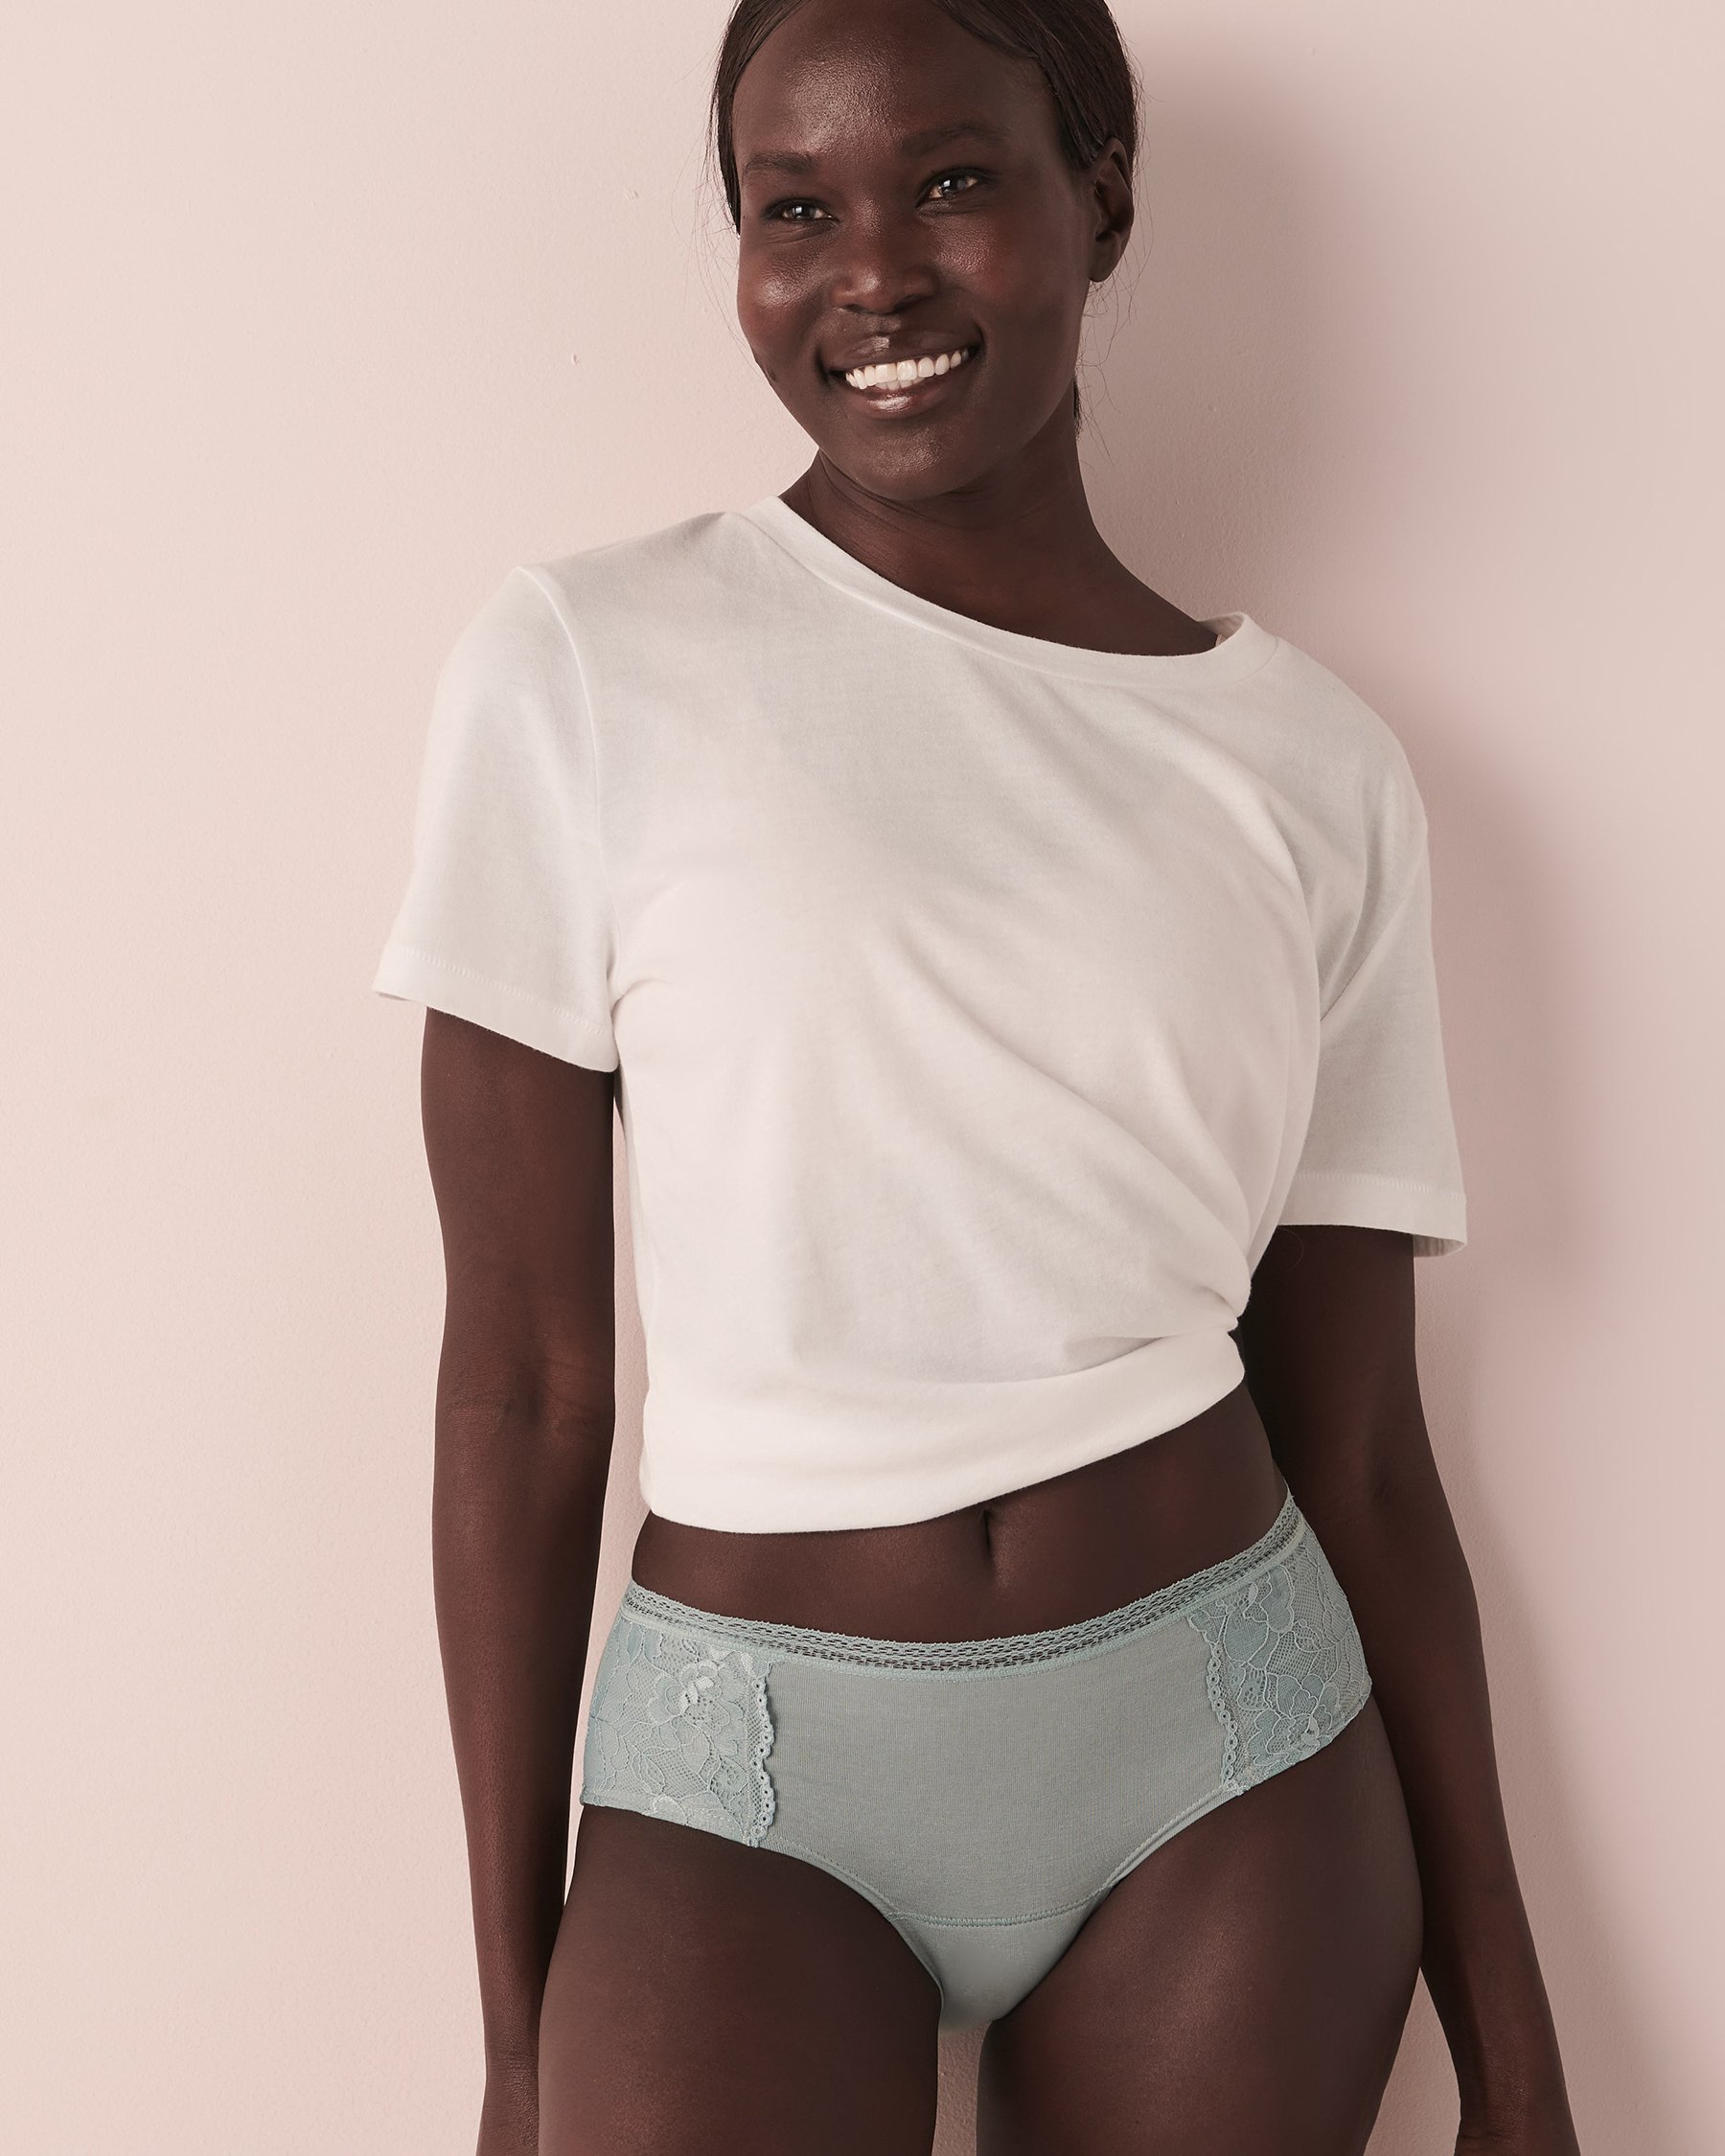 Hiphugger Cotton Period Panty by Newex Icy blue 20300189 - View1